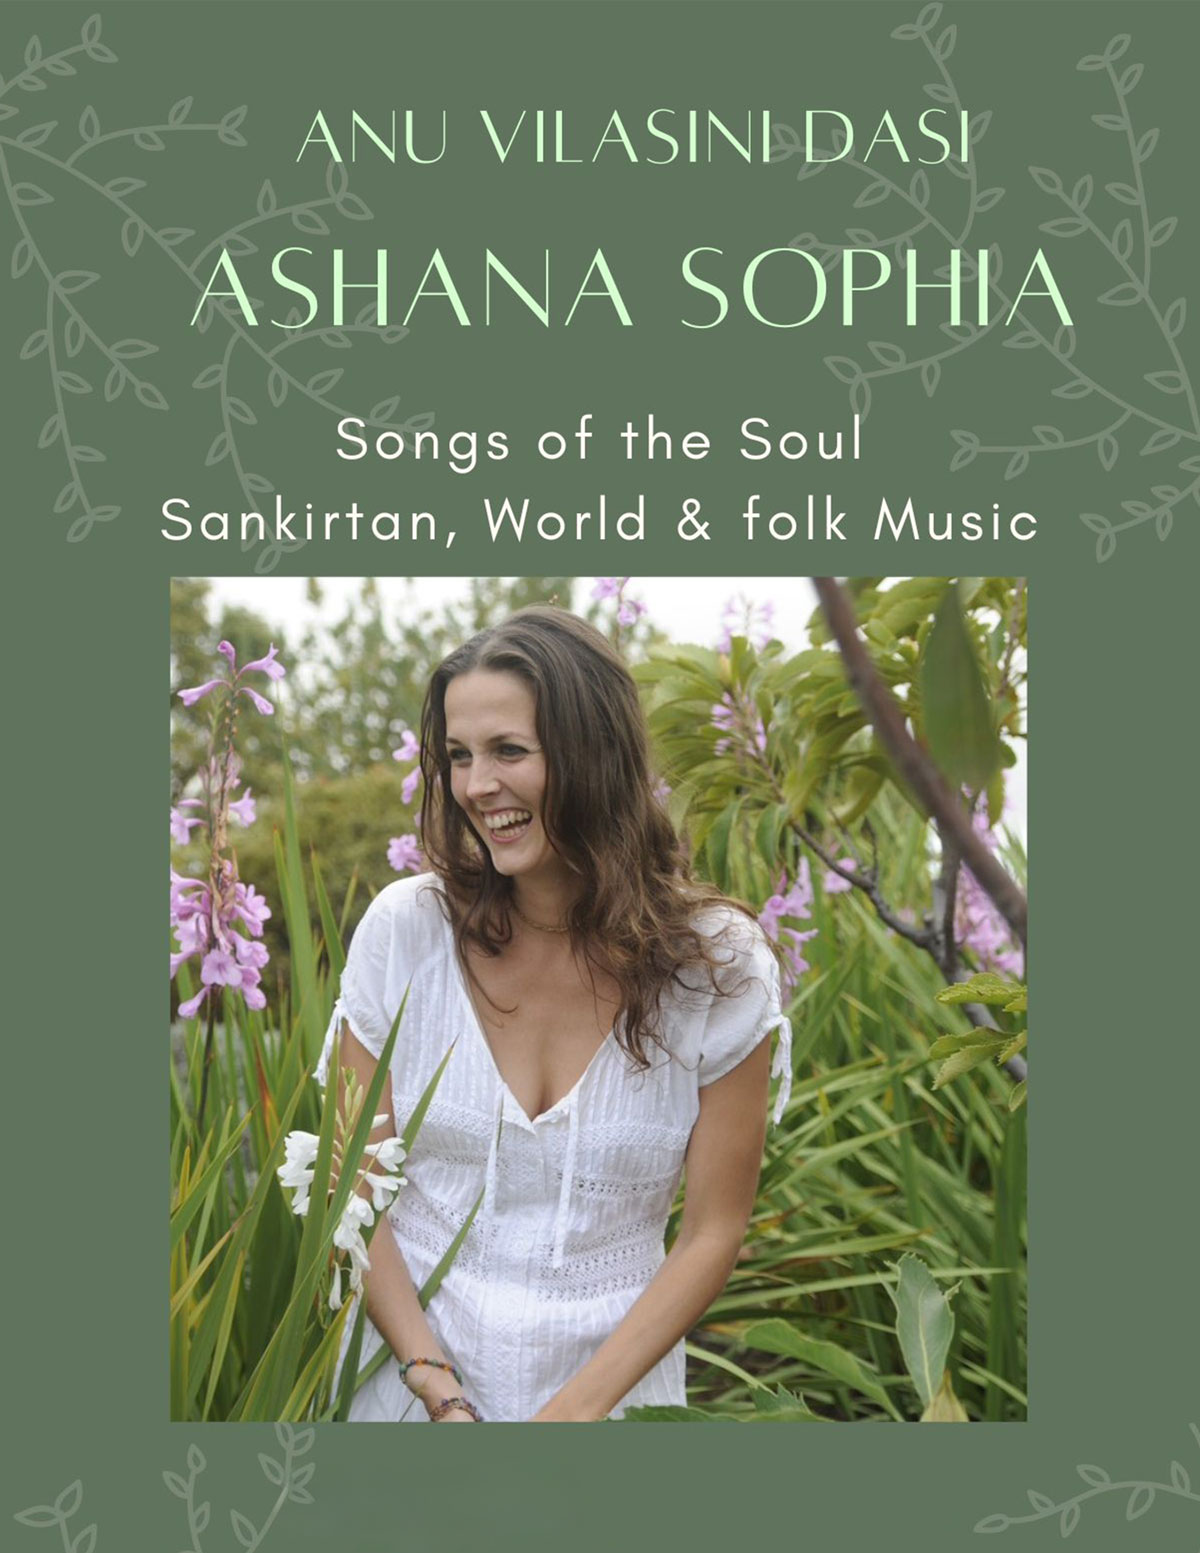 Olive green color poster of a smiling person, Ashana Sophia, in a purple flower garden, promoting a music event at I AM Maui.